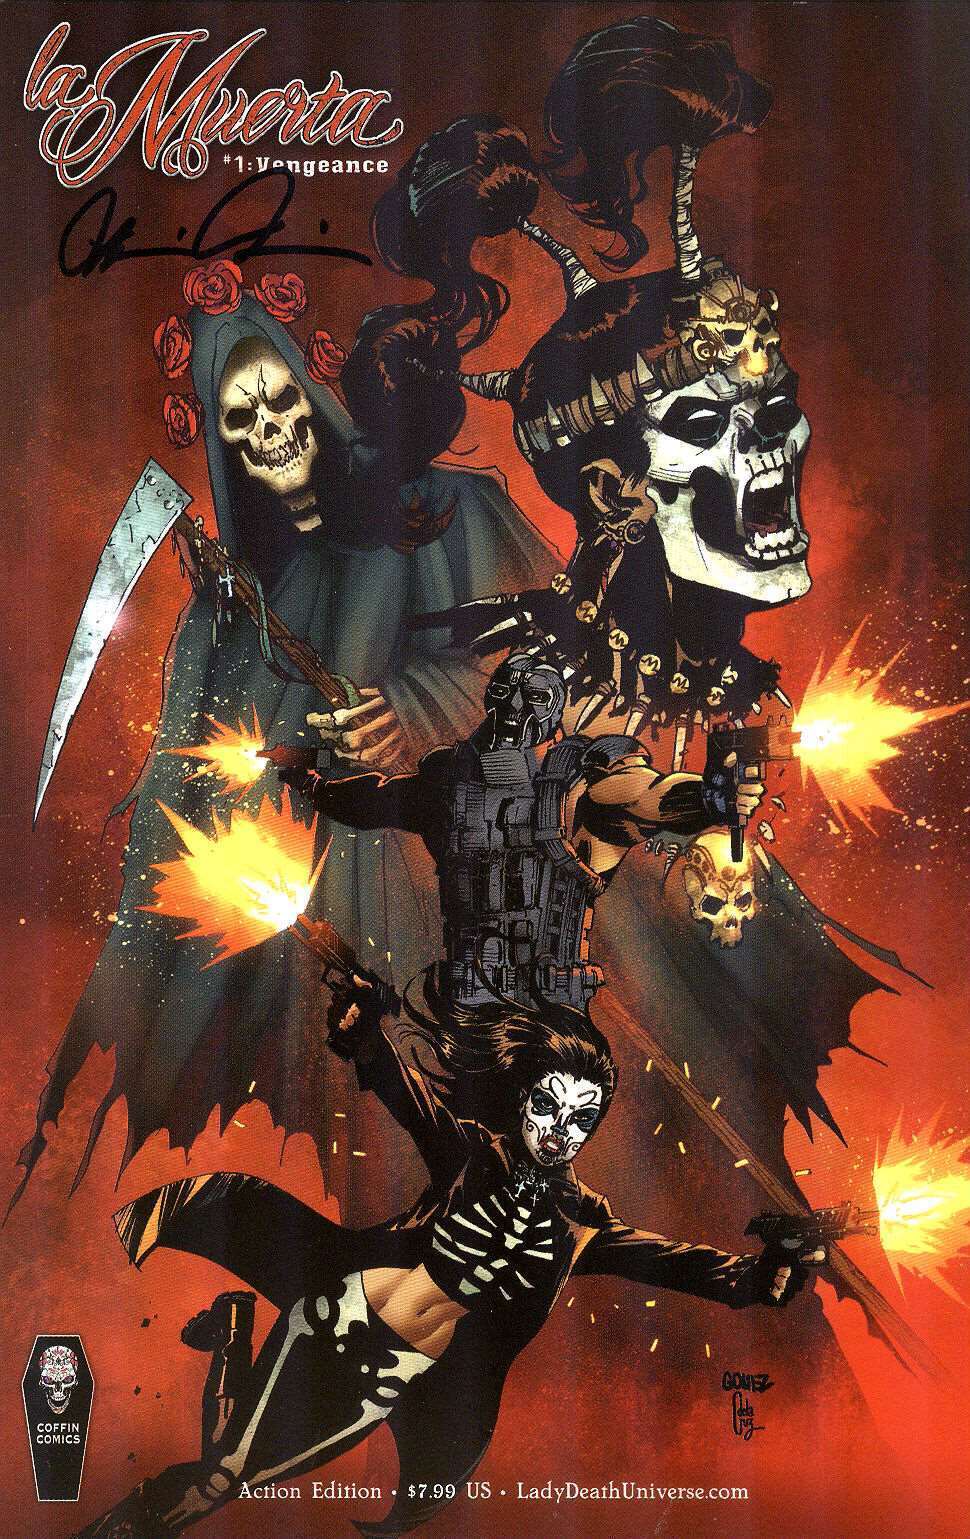 Muerta, La: Vengeance #1A VF/NM; Coffin | Action Edition - we combine shipping